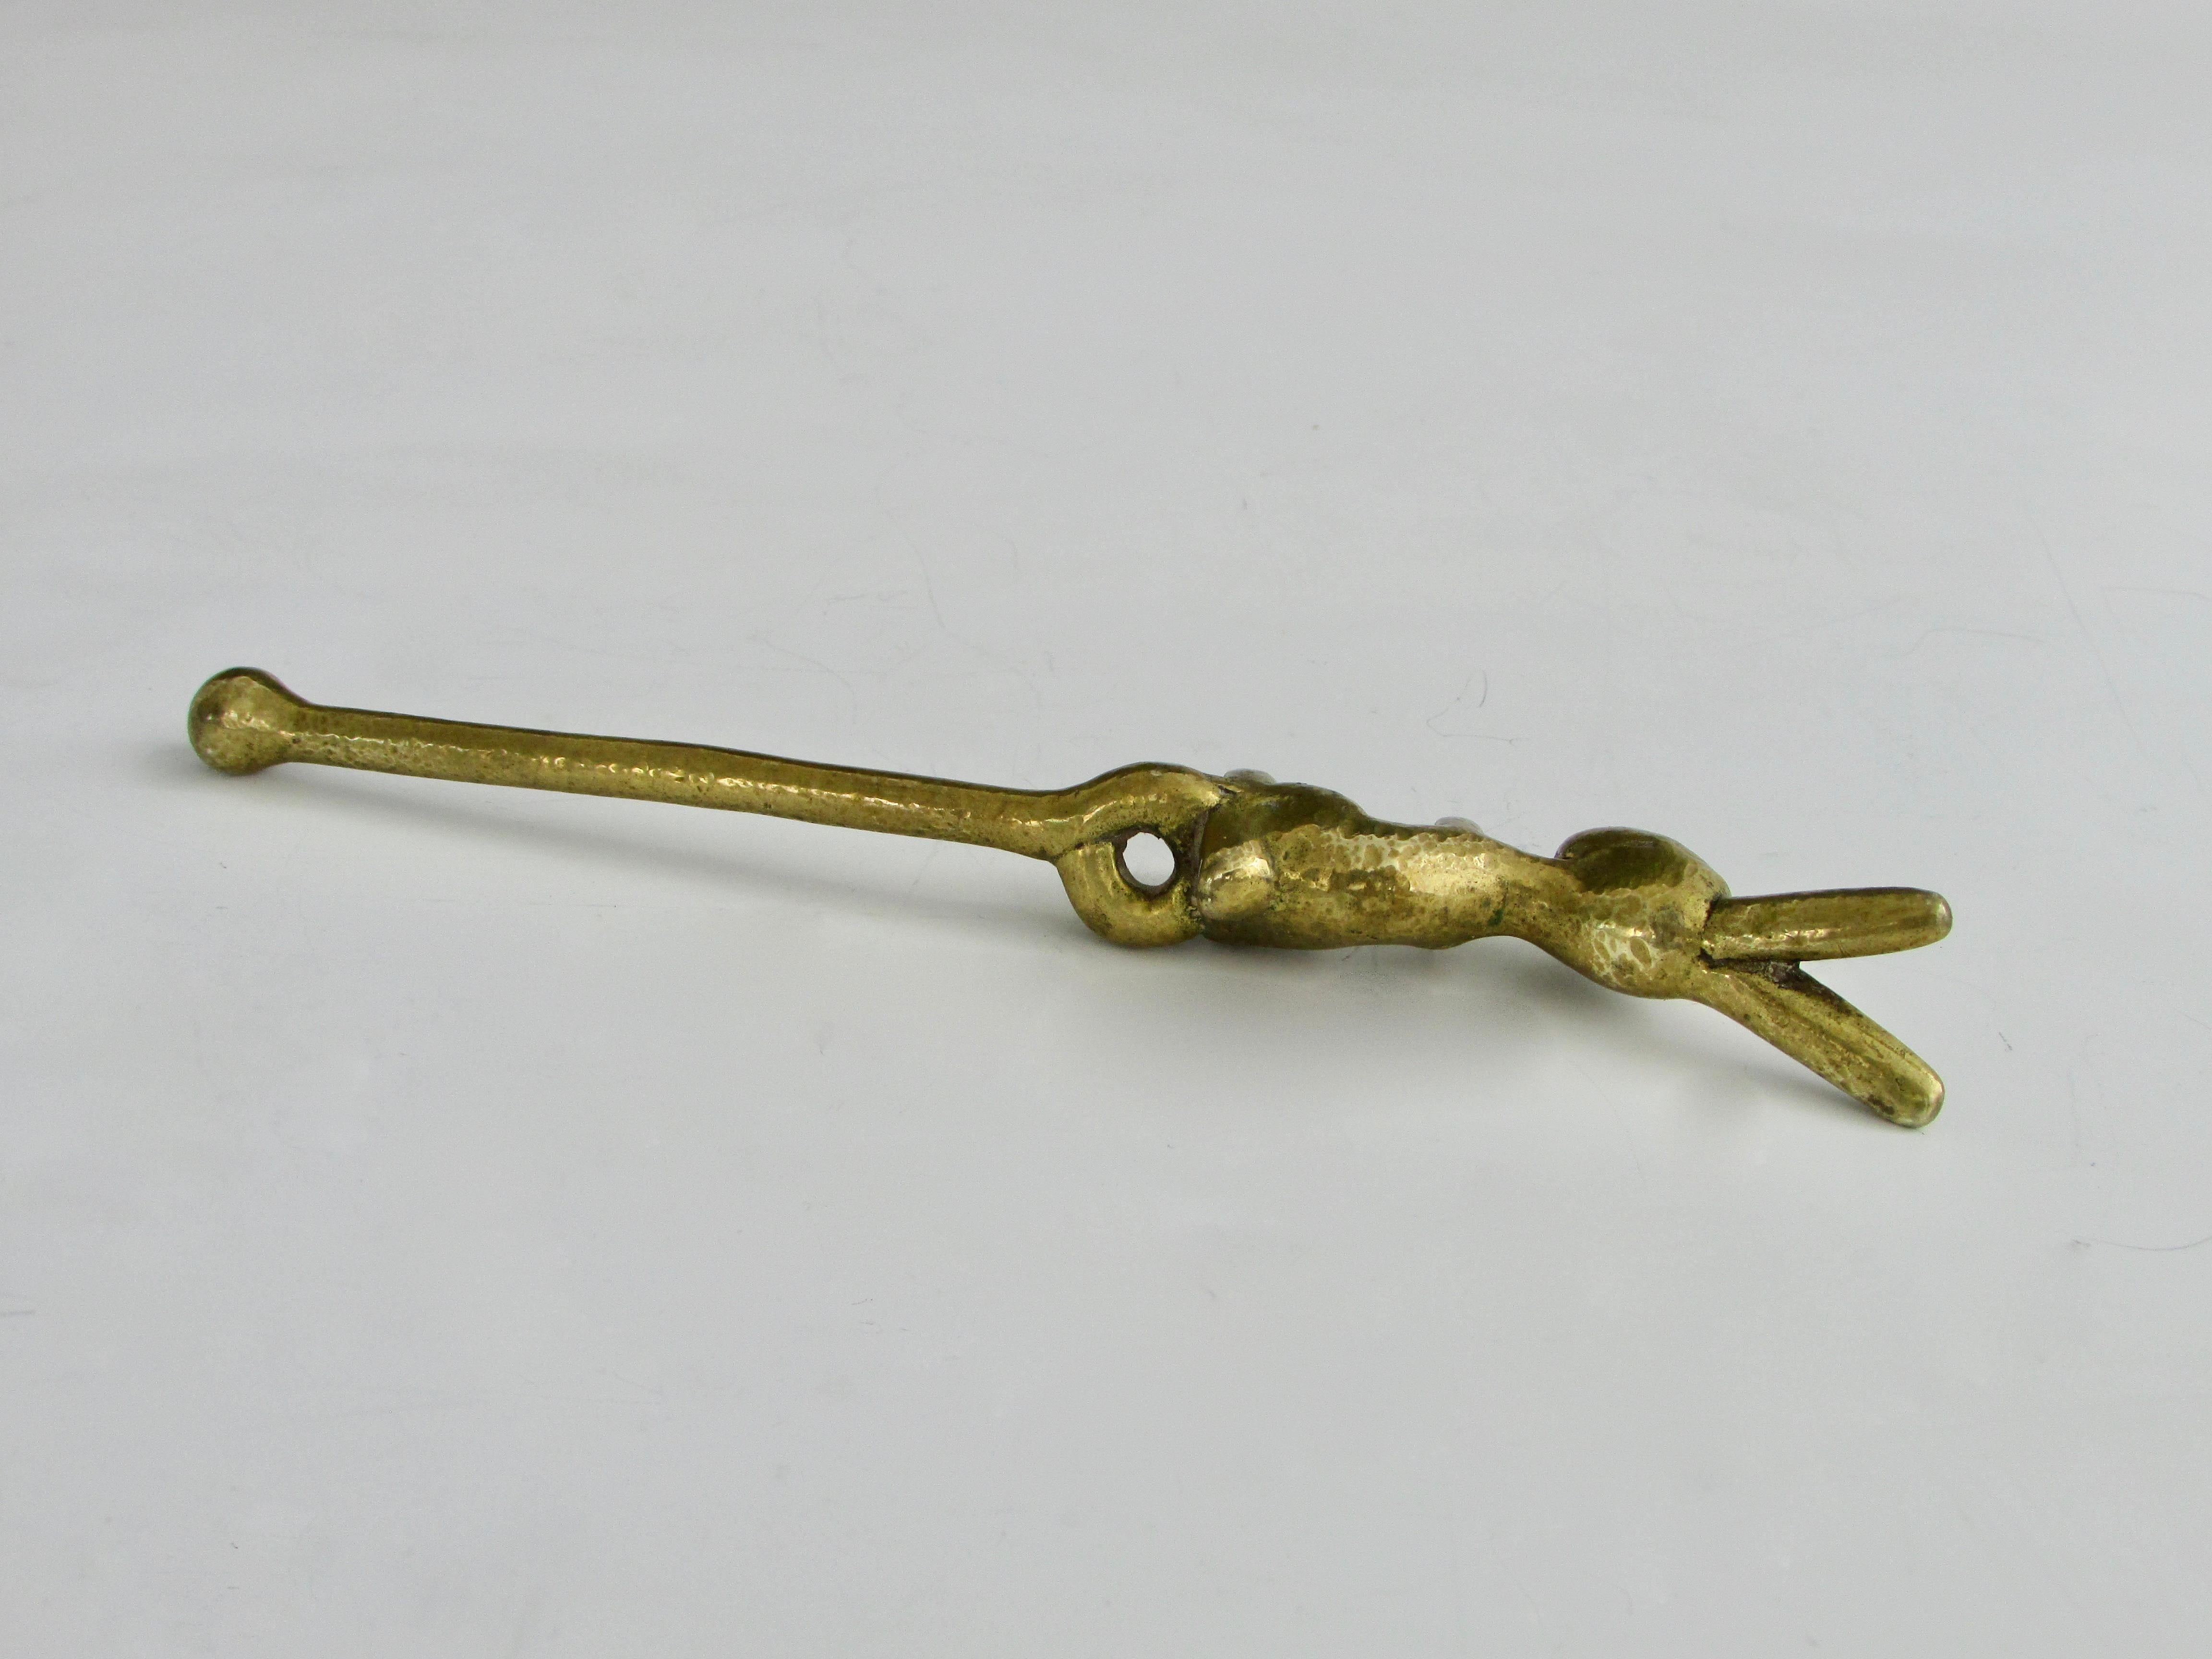 Fun Whimsical Cast Brass Bunny Whiskey Stir Stick In Good Condition For Sale In Ferndale, MI